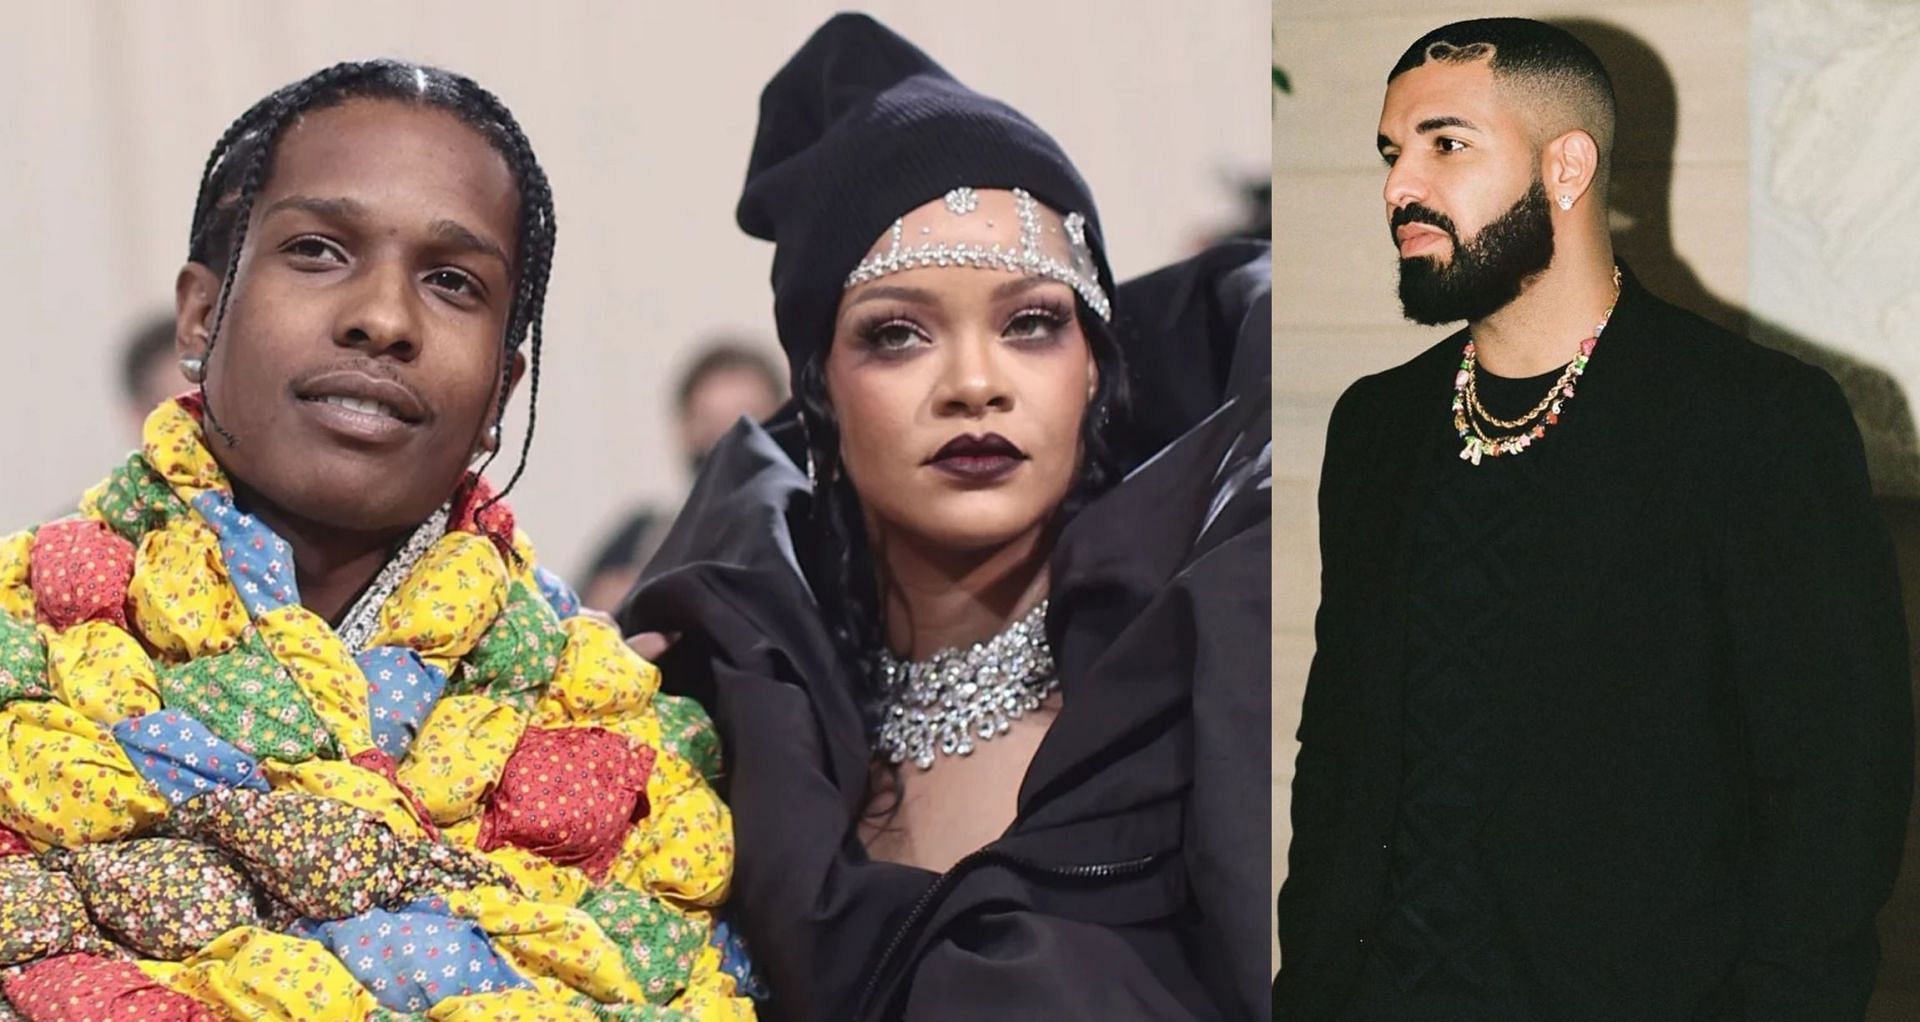 ASAP Rocky, Rihanna and Drake (Image via Dimitrios Kambouris/Getty Images, and champagnepapi/Instagram)